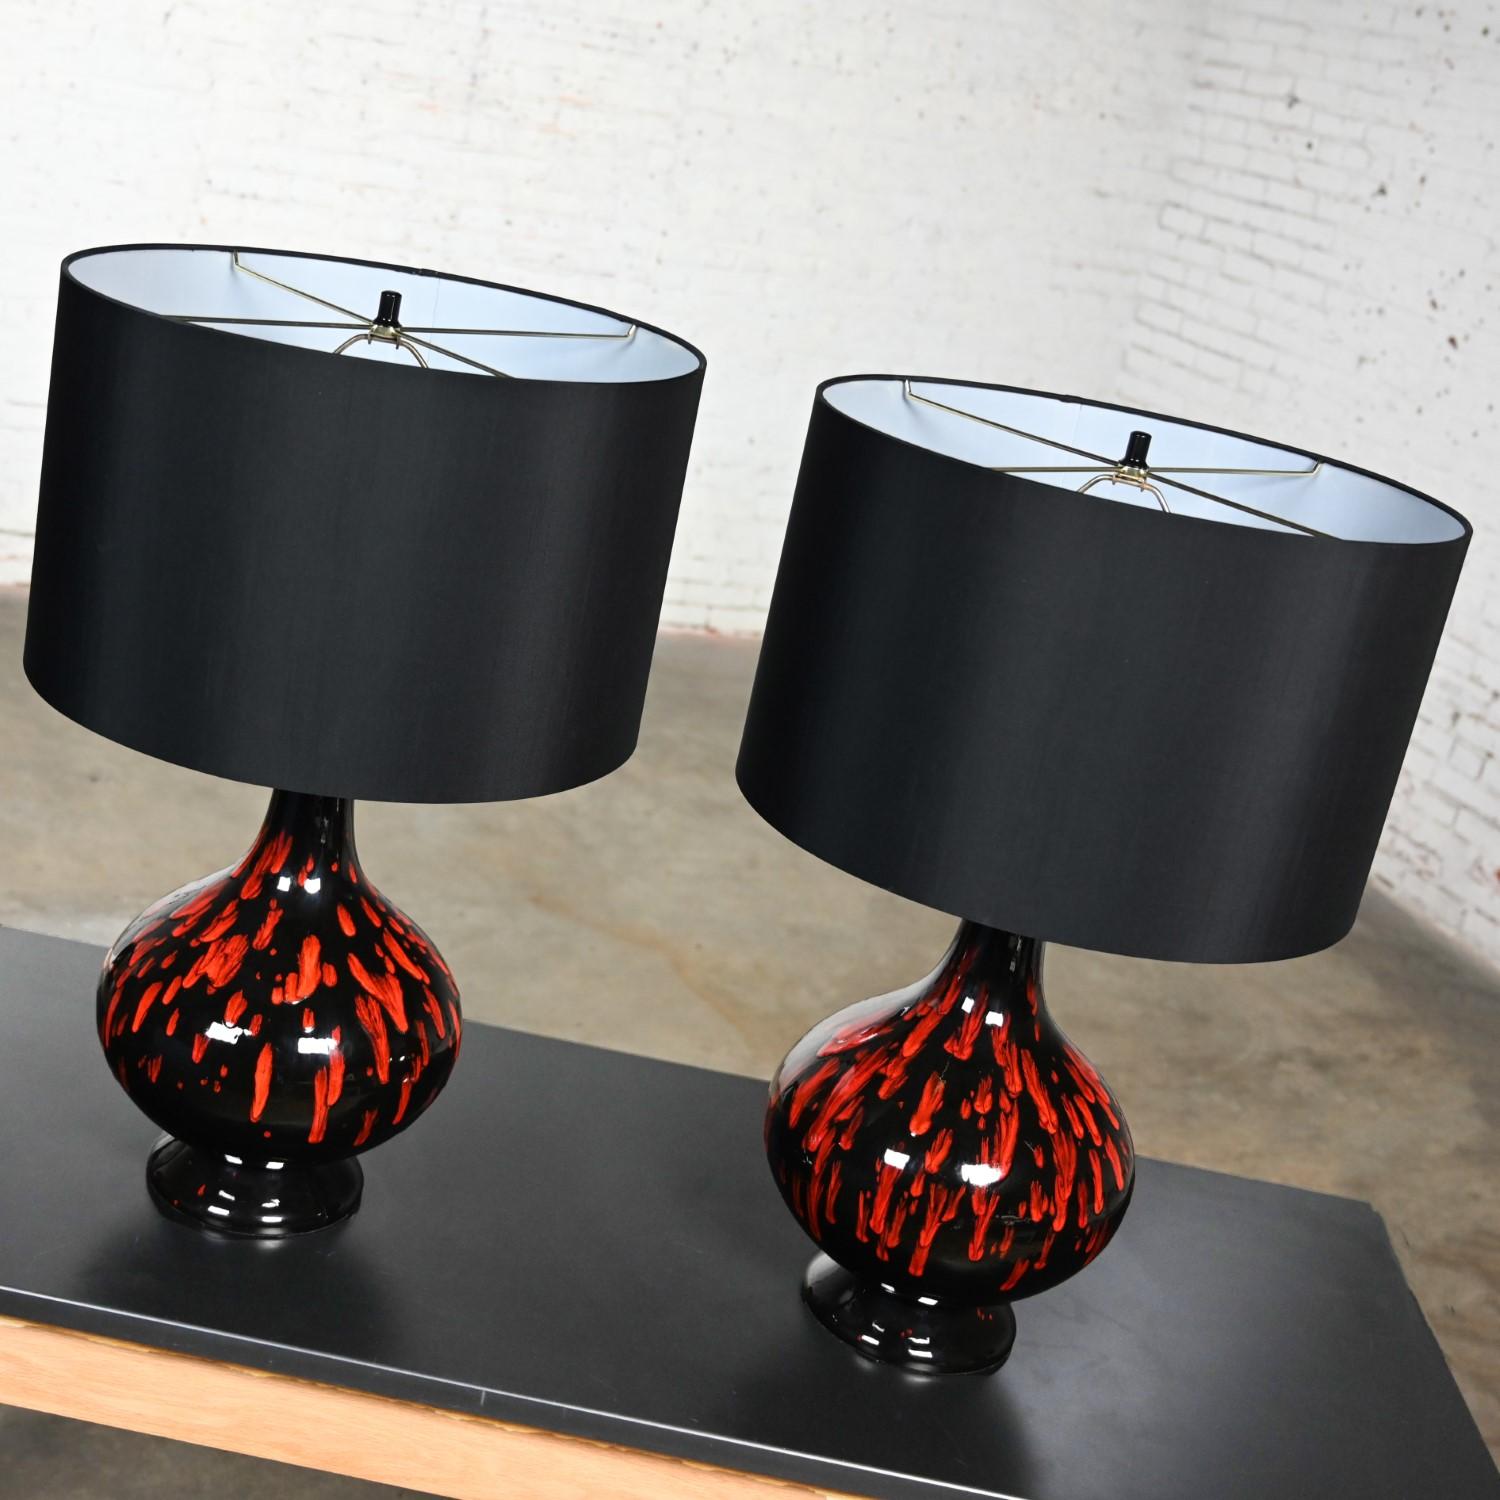 Gorgeous vintage Mid-Century Modern ceramic orange & black glossy drip glaze table lamps with new black linen-like drum shades, a pair. Beautiful condition, keeping in mind that these are vintage and not new so will have signs of use and wear even